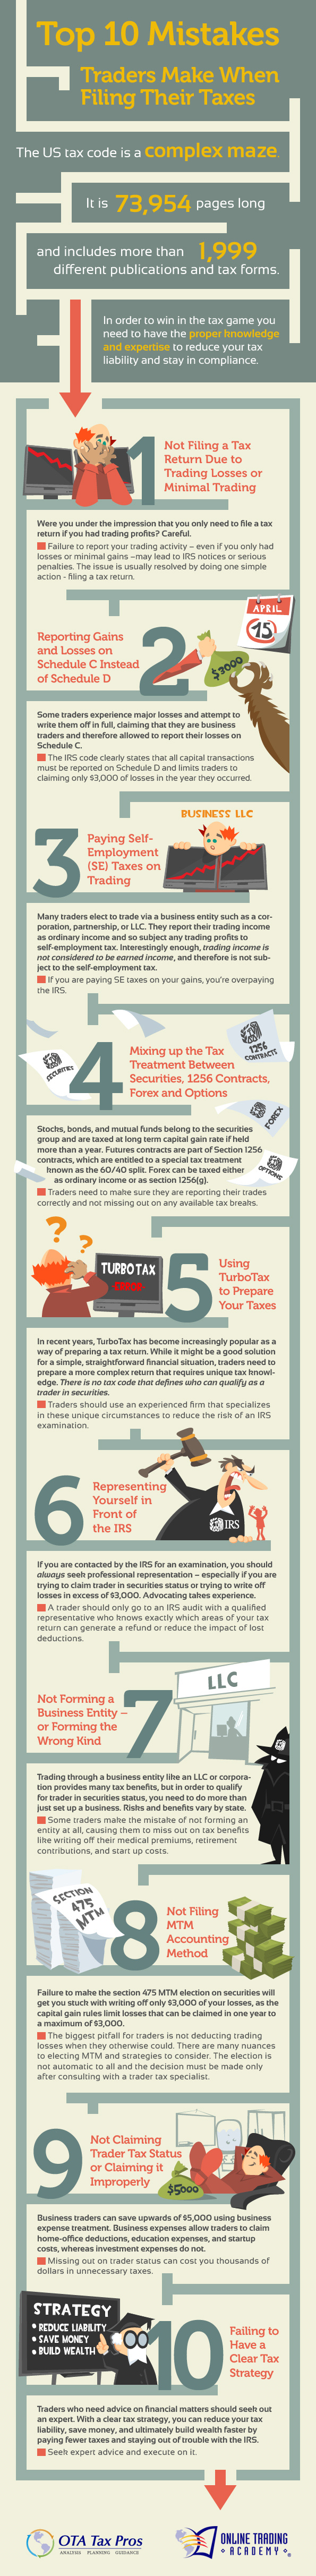 Top 10 Tax Mistakes Traders Make